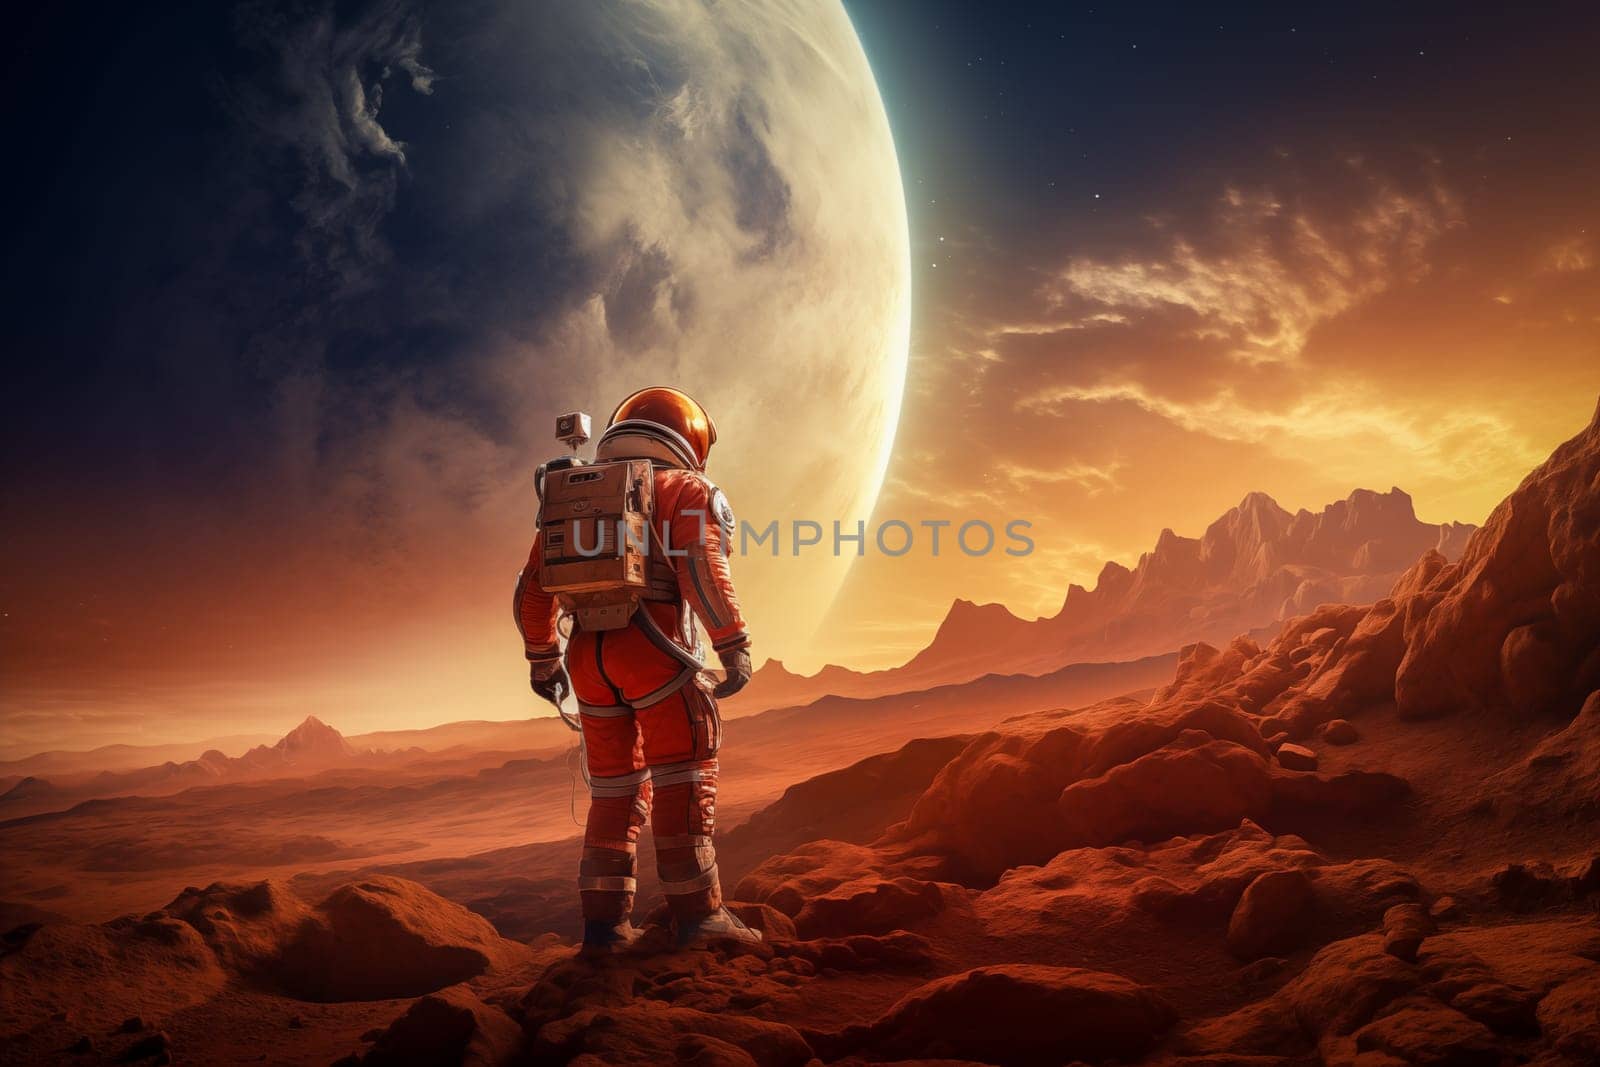 Future space travel mission to Mars - Astronaut in an orange suit walking on the surface of Mars with mountains and a moon in the background.